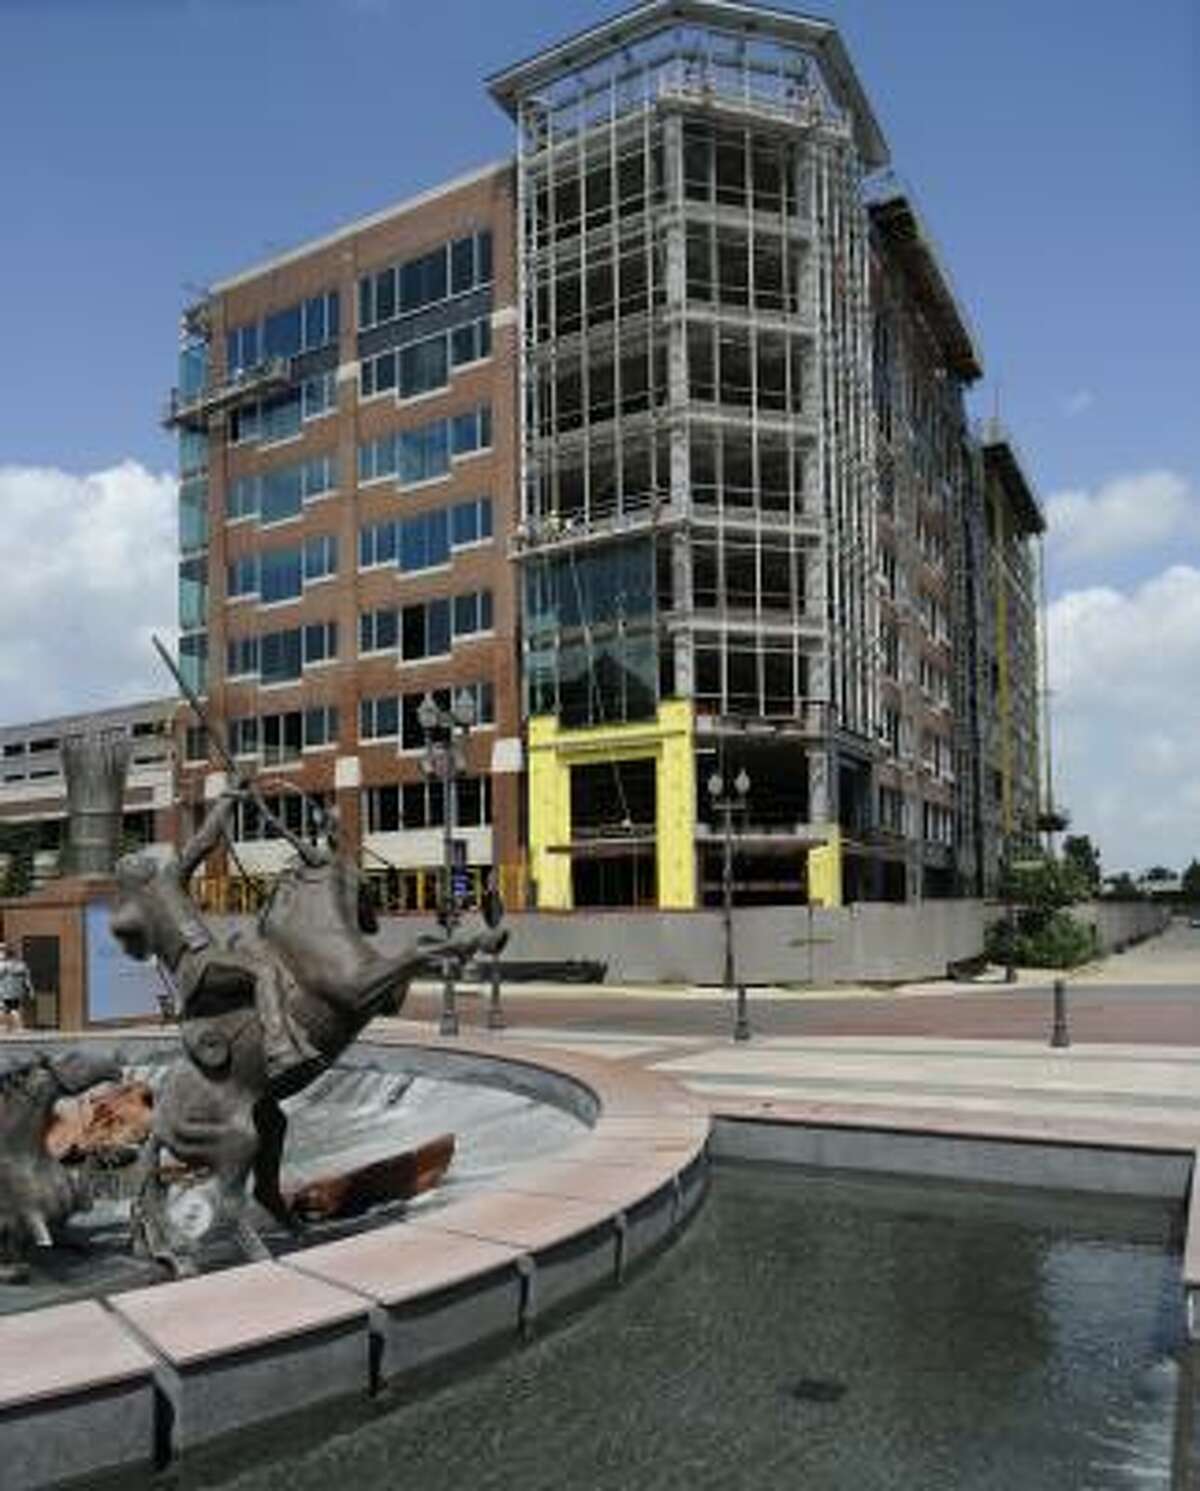 The Minute Maid building, under construction, is the newest structure at Sugar Land's Town Square Center. Fort Bend leads the nation in employment growth.